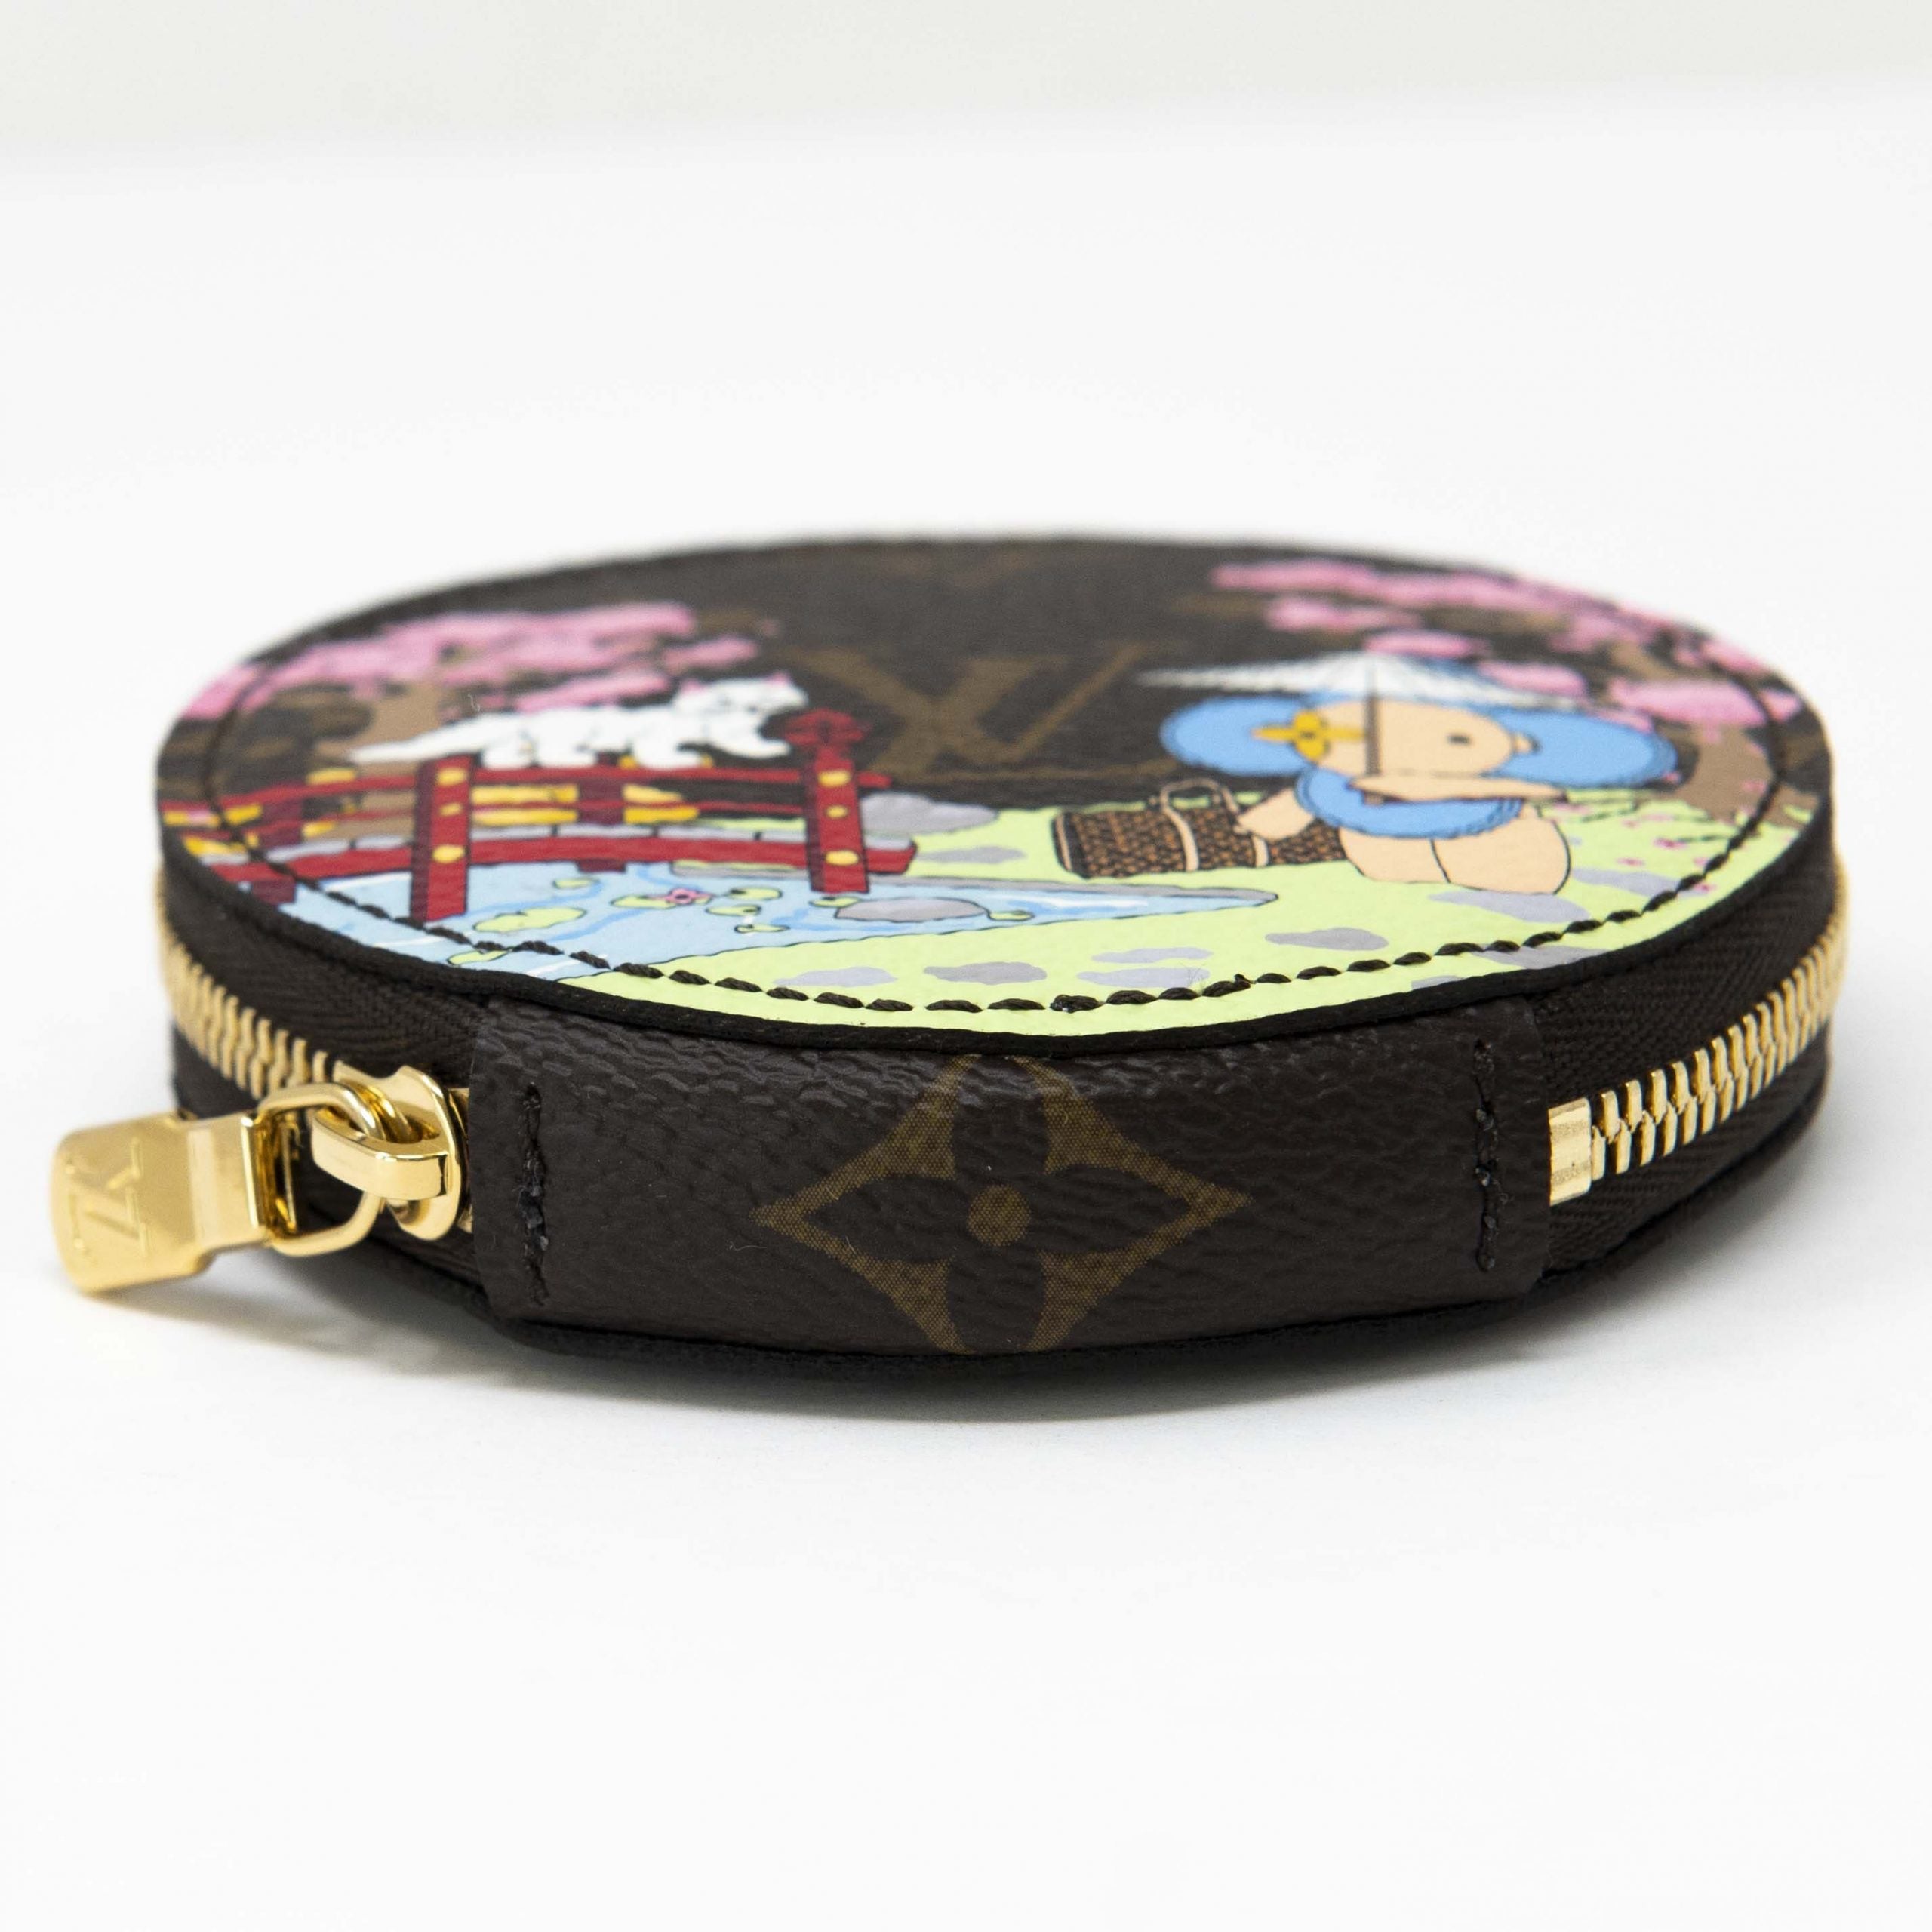 Round Coin purse in Monogram Coated Canvas, Gold Hardware